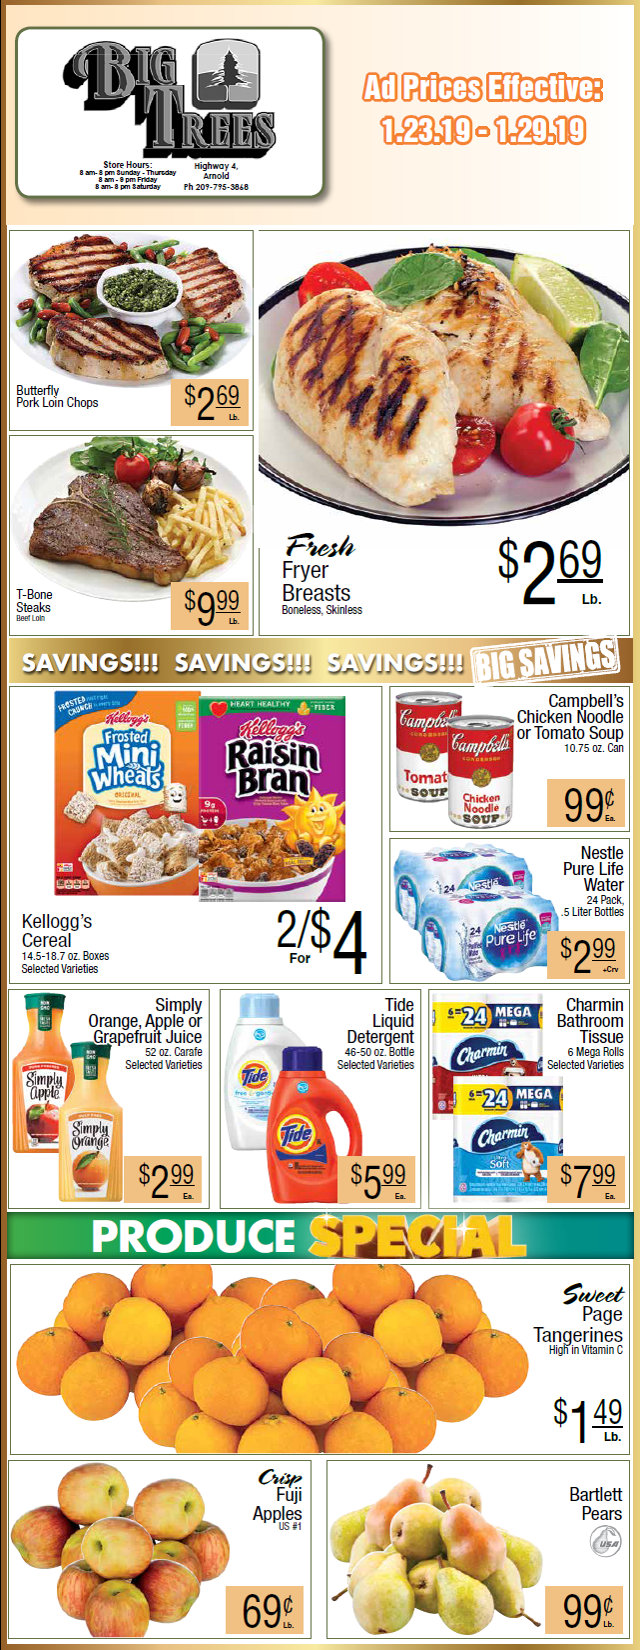 Big Trees Market Weekly Ad & Grocery Specials Through January 29th